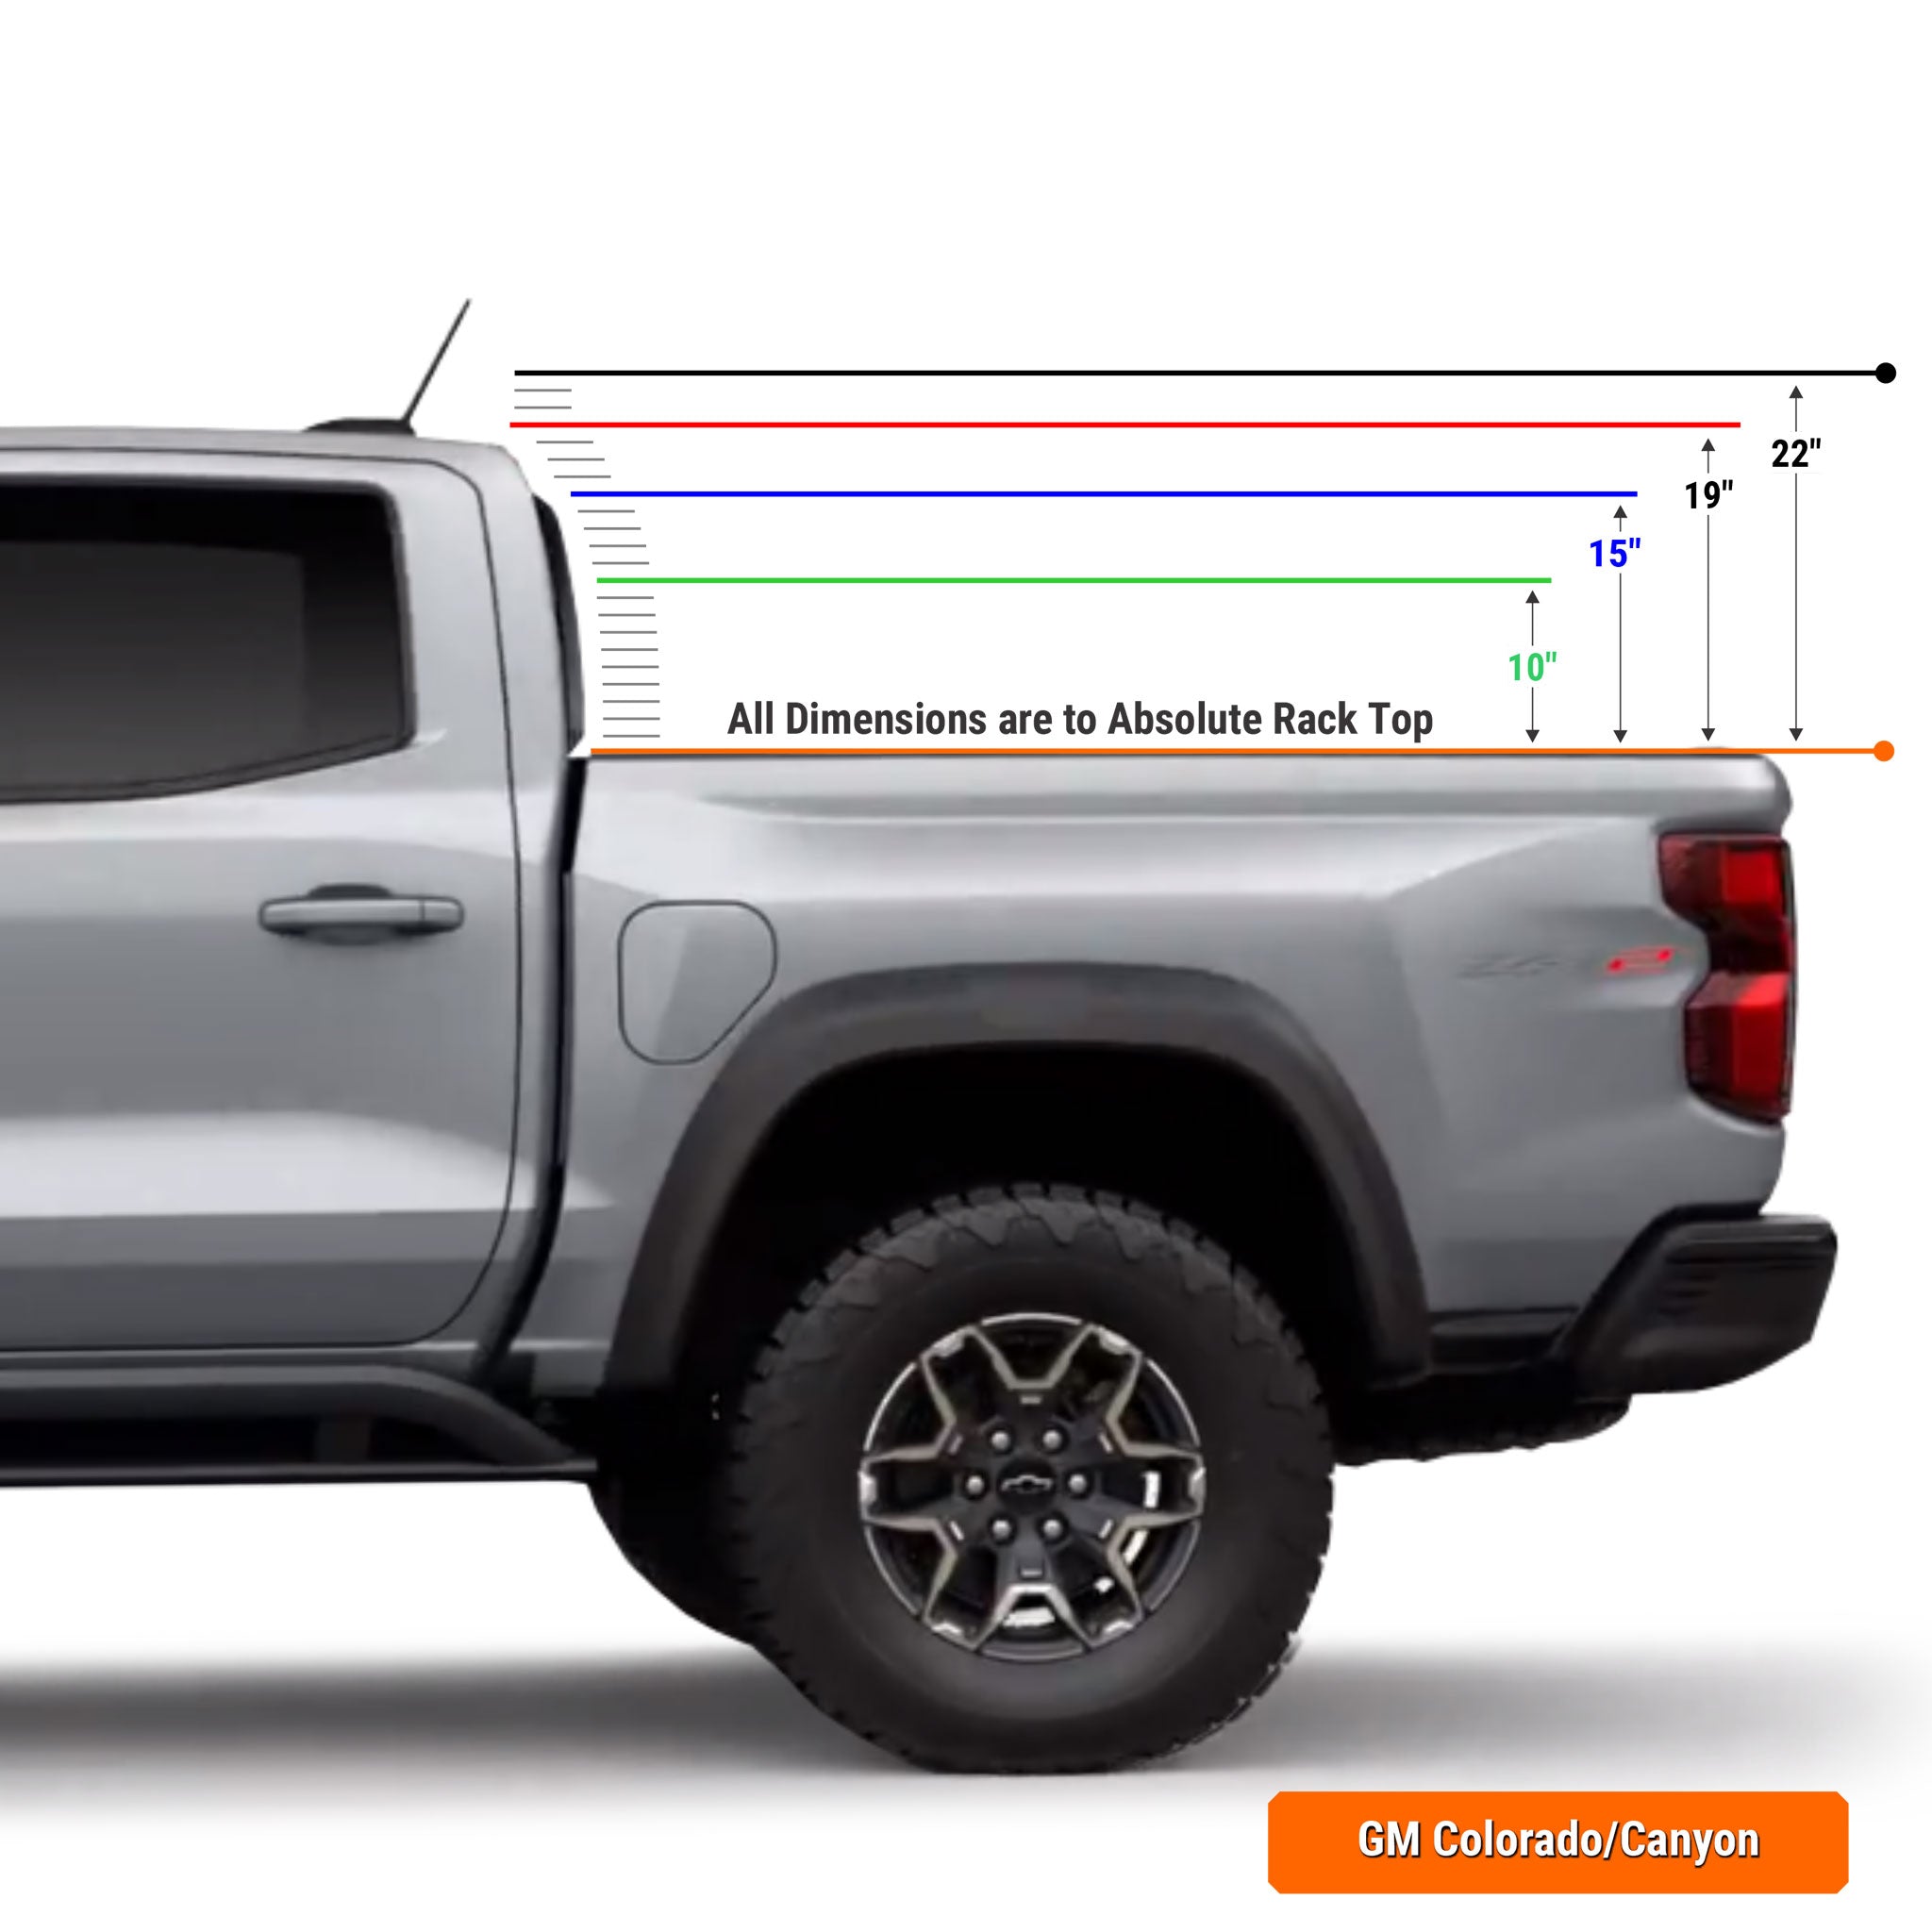 Chevy Colorado / GMC Canyon Bed Rack Height Chart